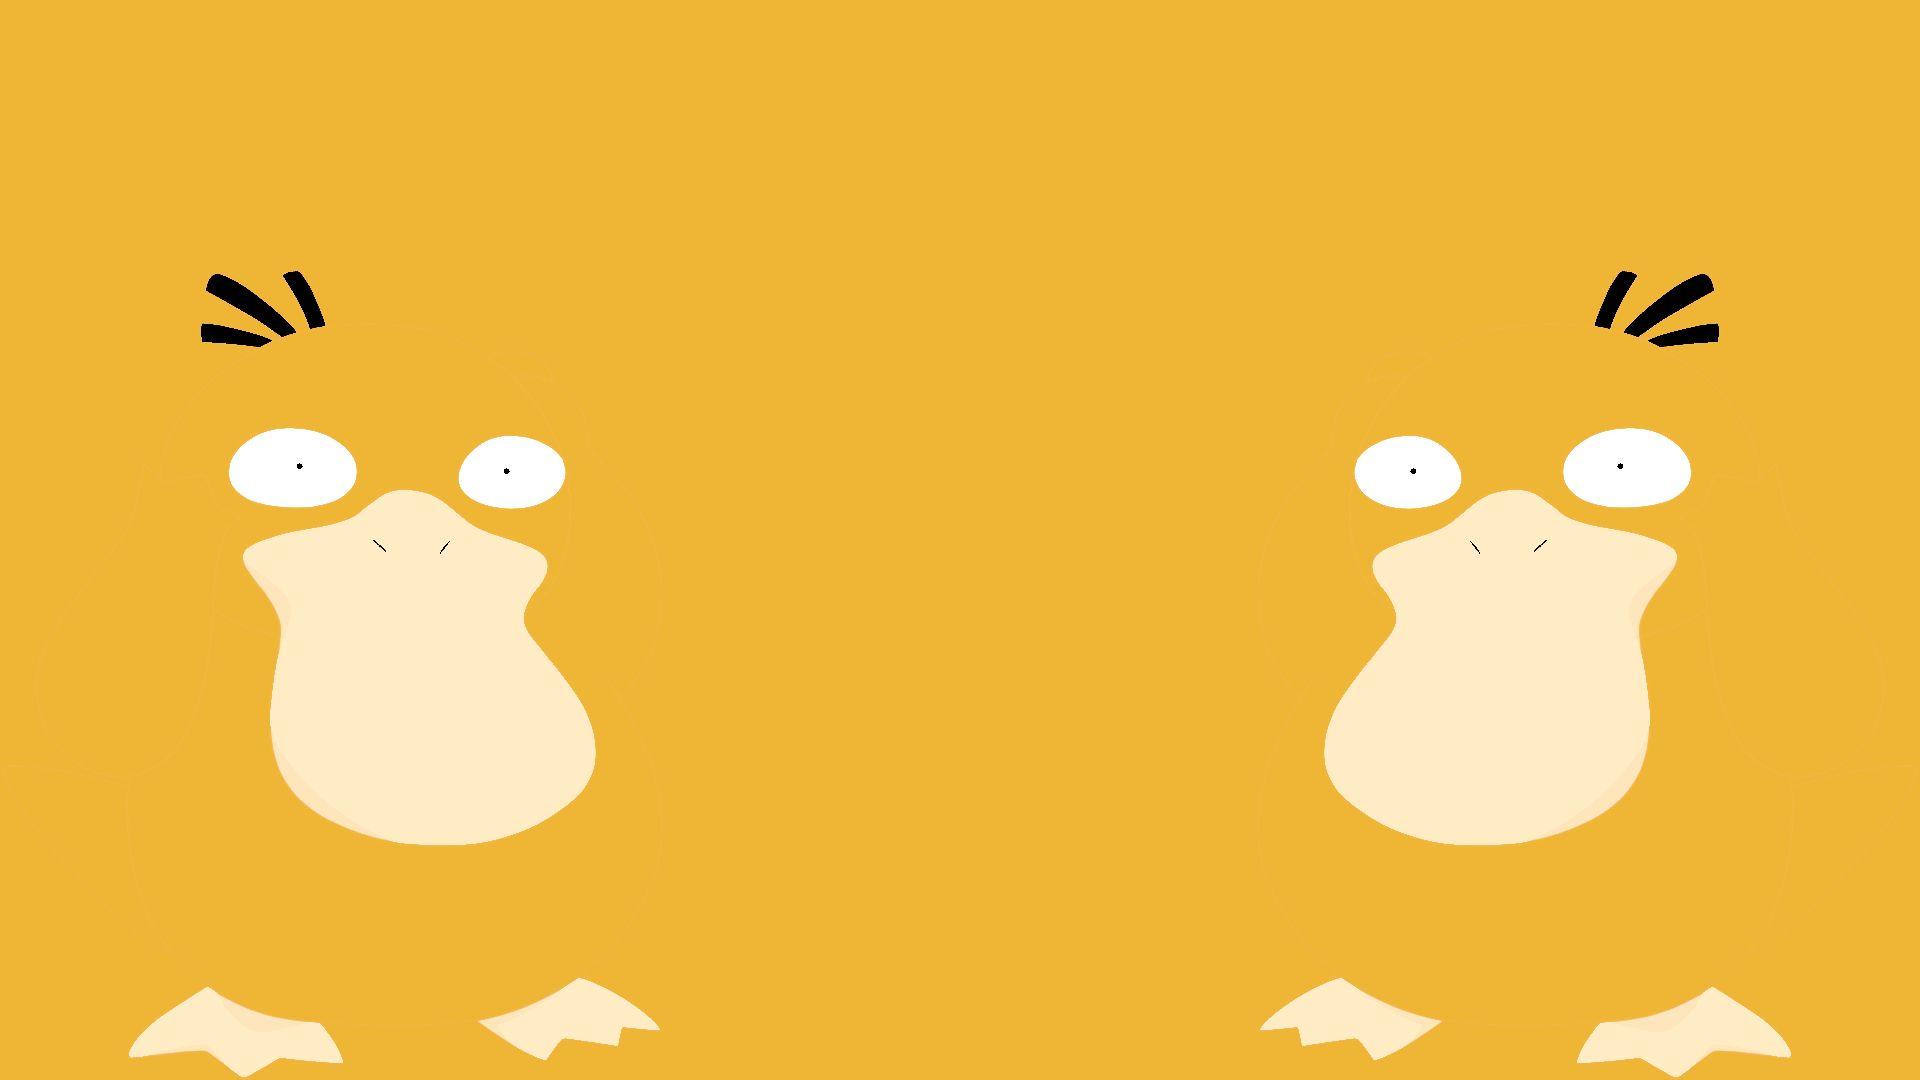 My first selfmade wallpaper (of my favourite Pokémon). Psyduck